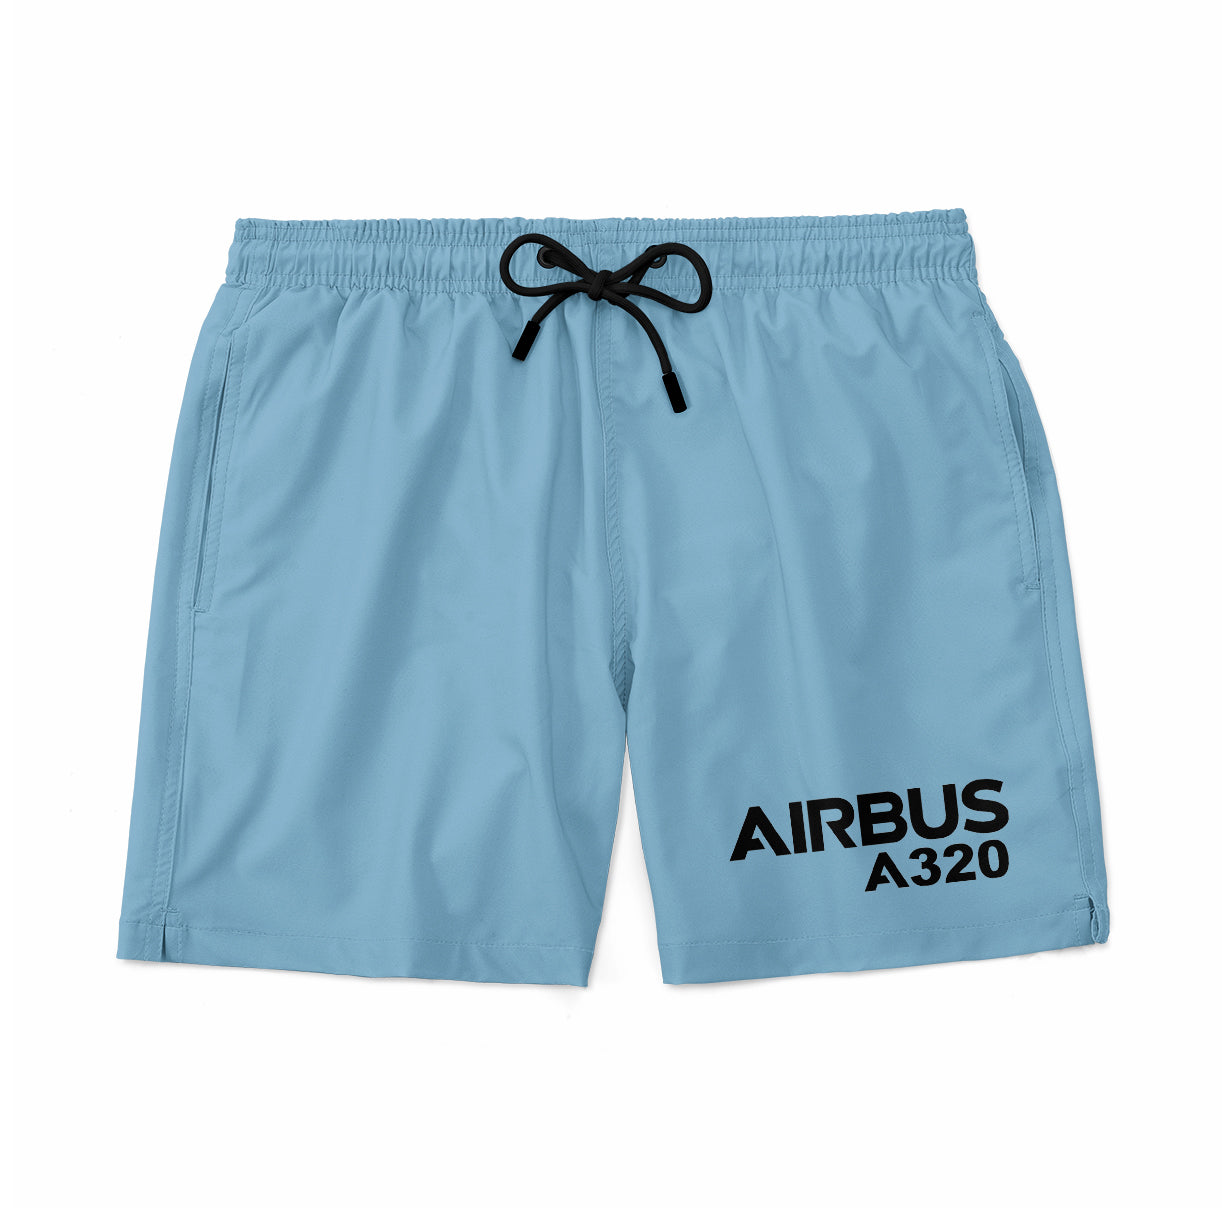 Airbus A320 & Text Designed Swim Trunks & Shorts